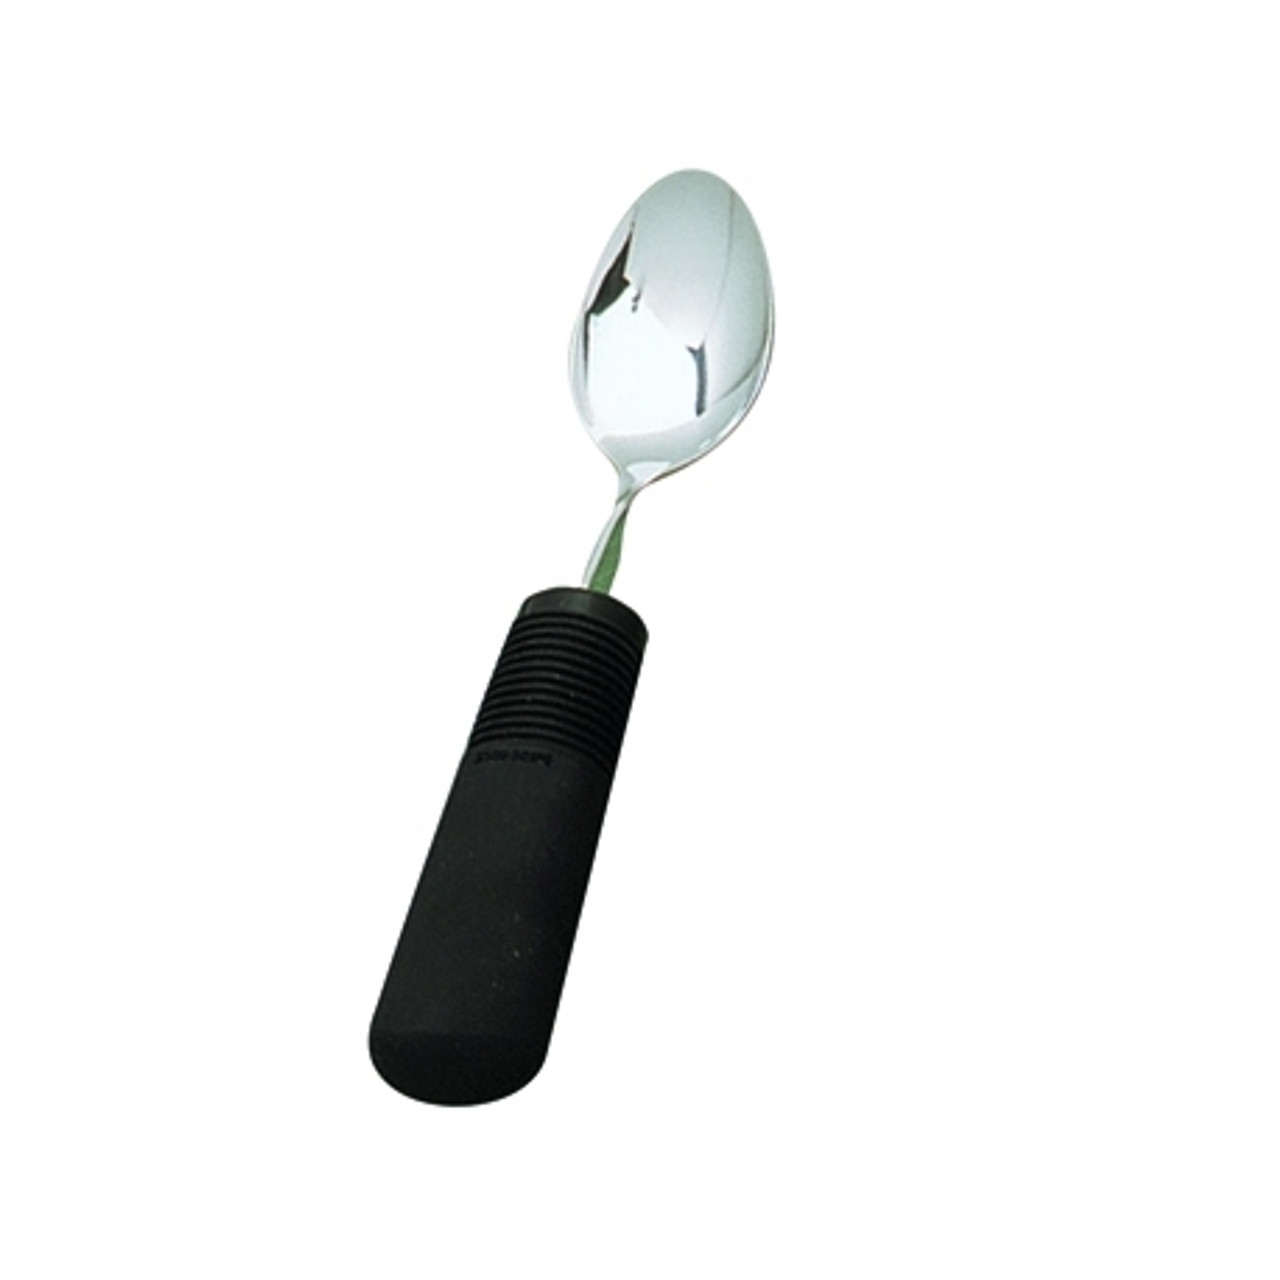 North Coast Good Grips Weighted Utensils - Tablespoon